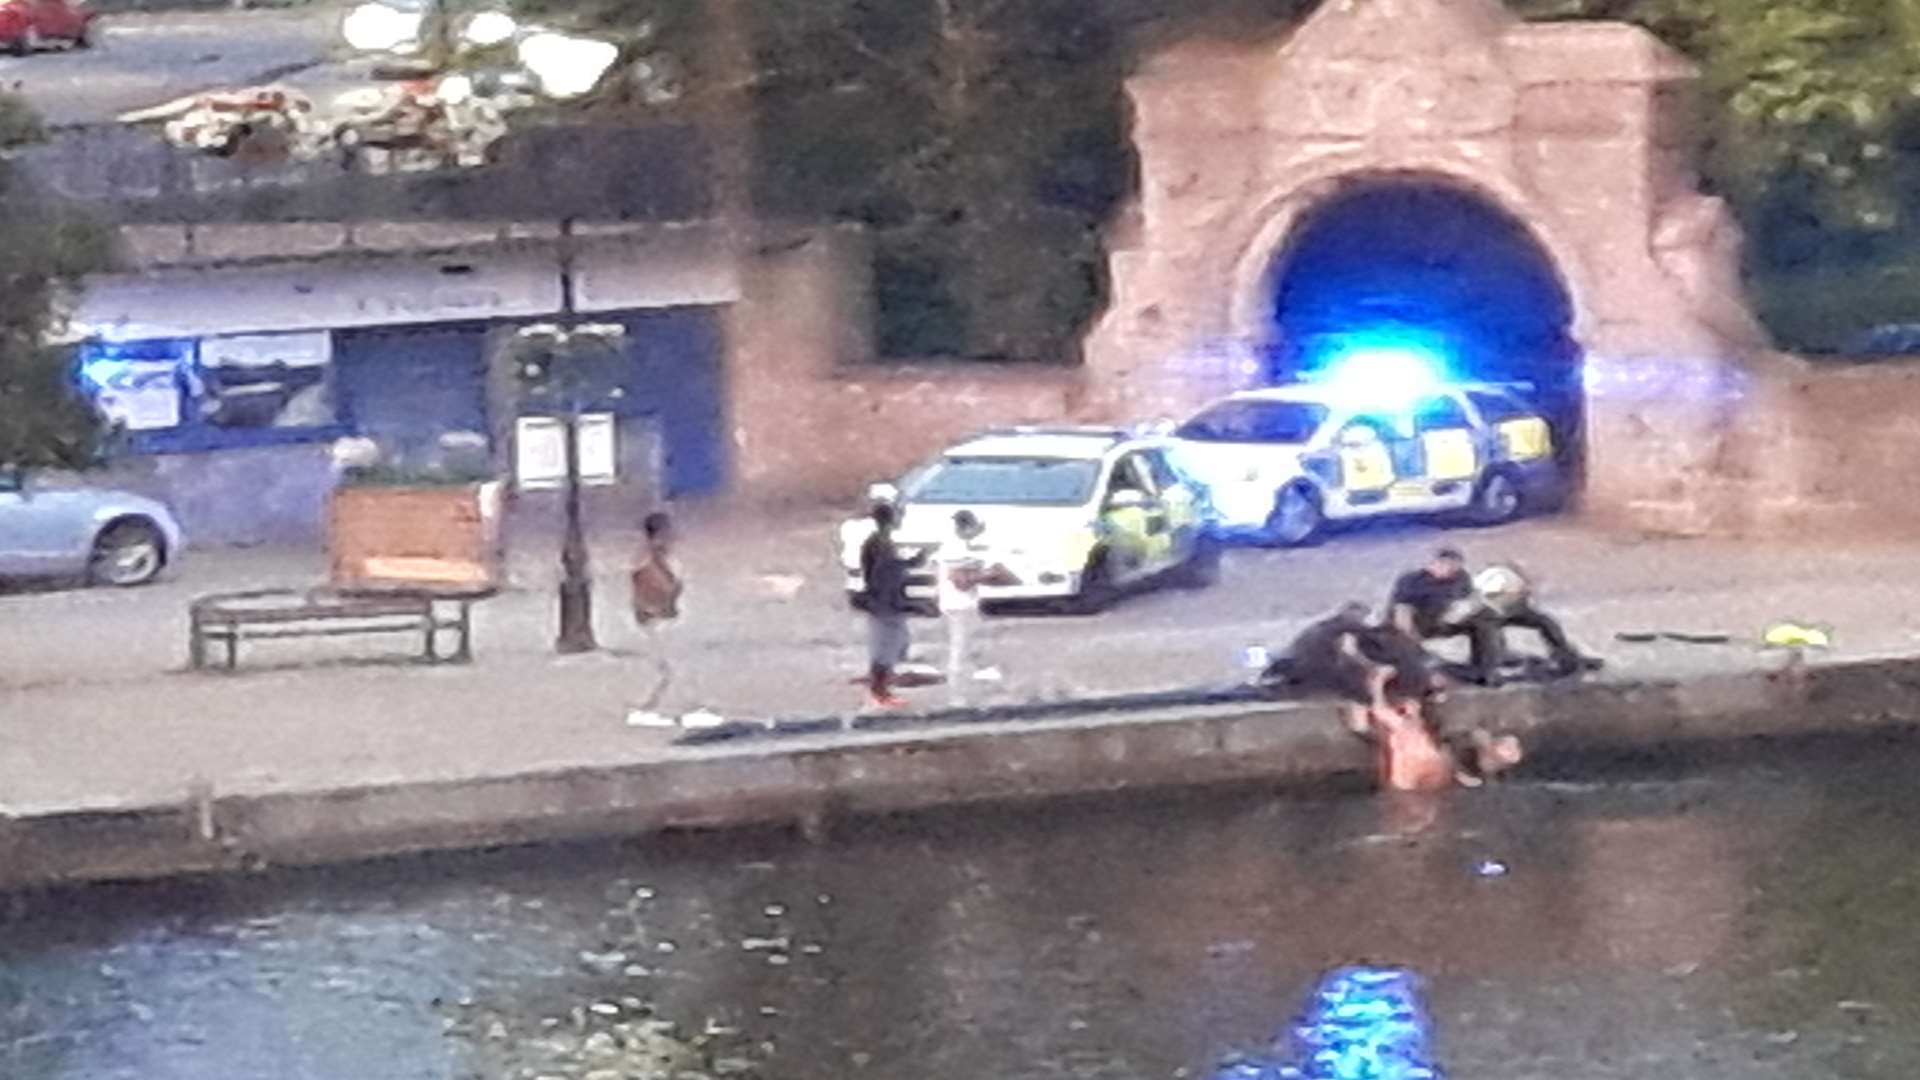 The man was hauled out of the water in Maidstone